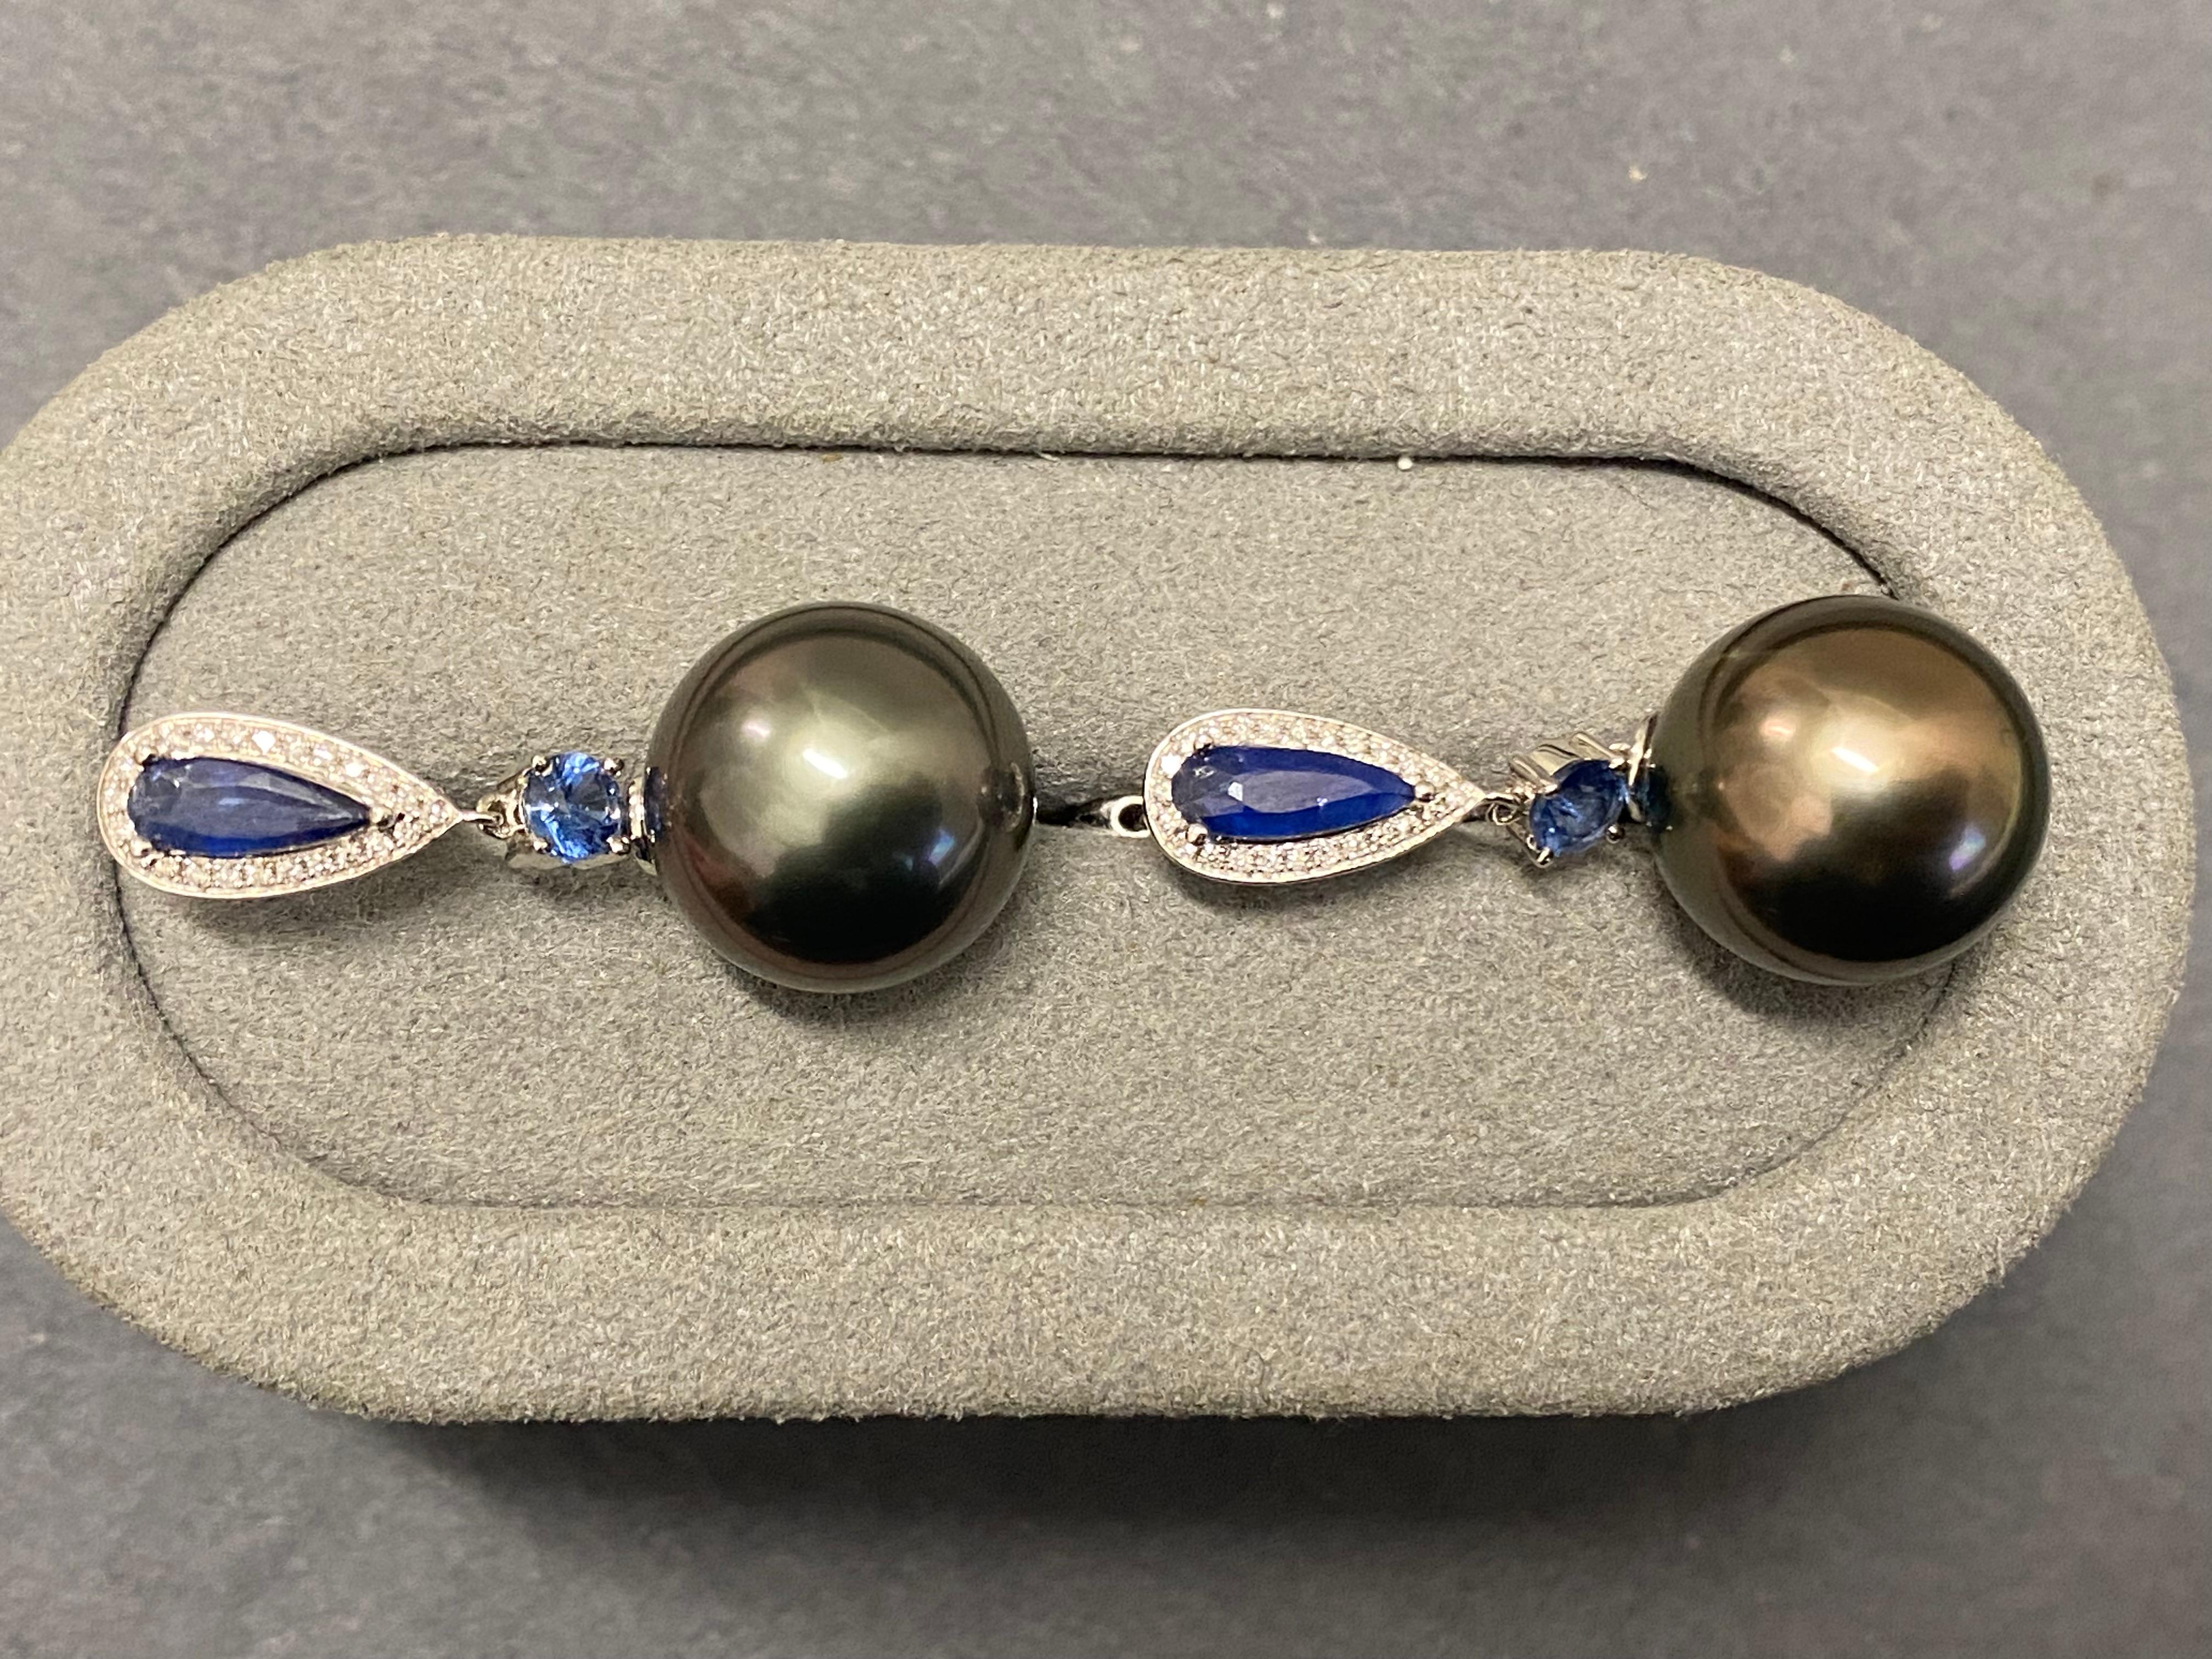 A pair of Tahitian pearl, blue sapphire and diamond earrings in 18k white gold. The Tahitian pearl is suspended below a rain drop shape blue sapphire and is connected via a round lighter colour blue sapphire. This set up allows the dangle Tahitian